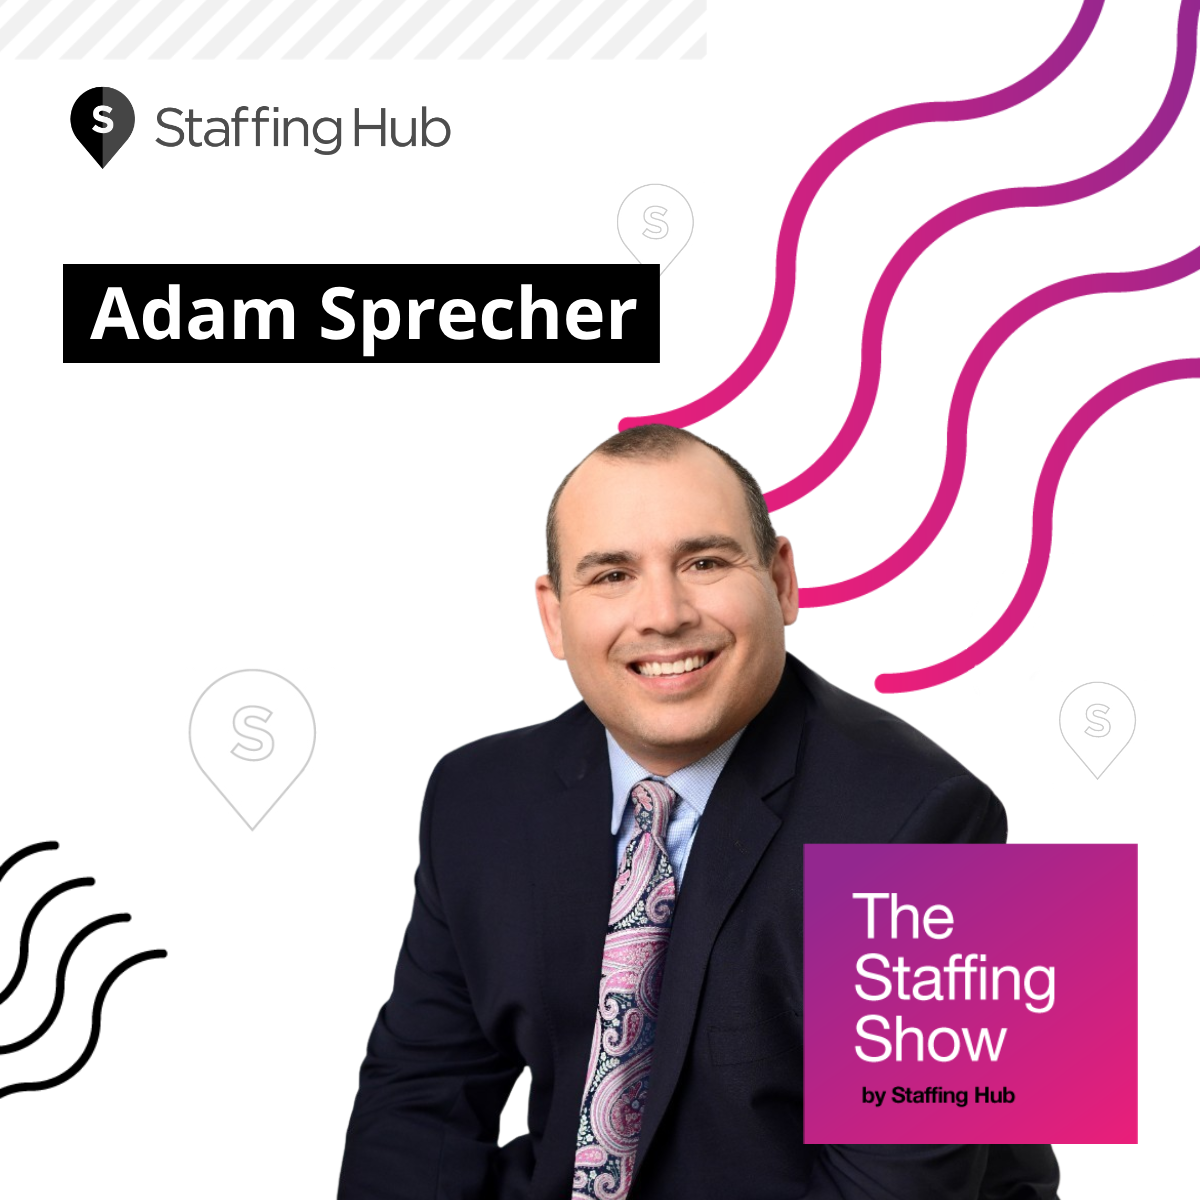 Intentionally Leaning on Value for Growth with Adam Sprecher, Staffing Industry Veteran